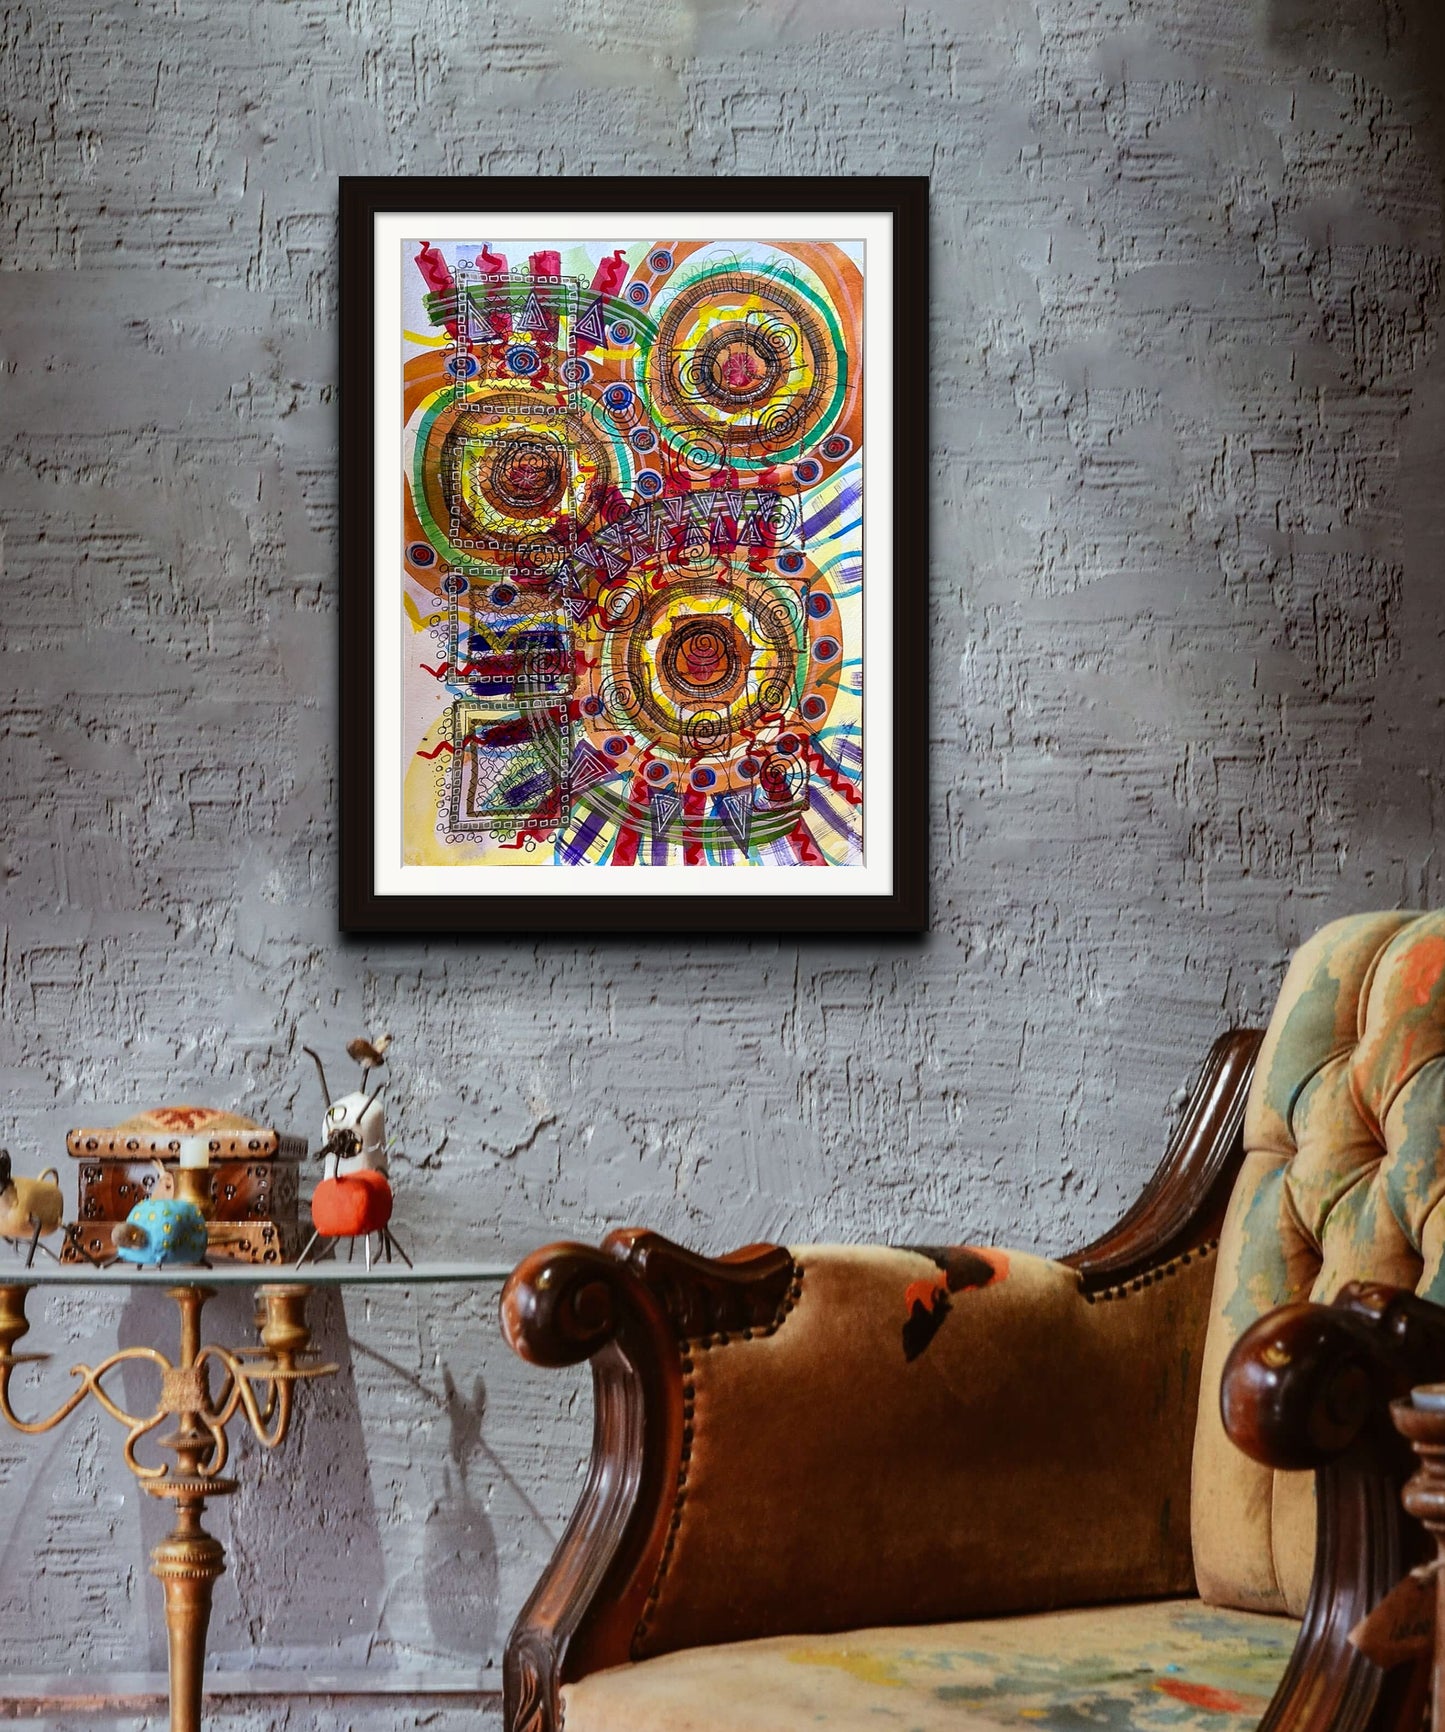 Colorful mixed media abstract and graphic design titled Trilogy by artist Jenifer Hernandez., framed for display only in dark wood and floated on black background.